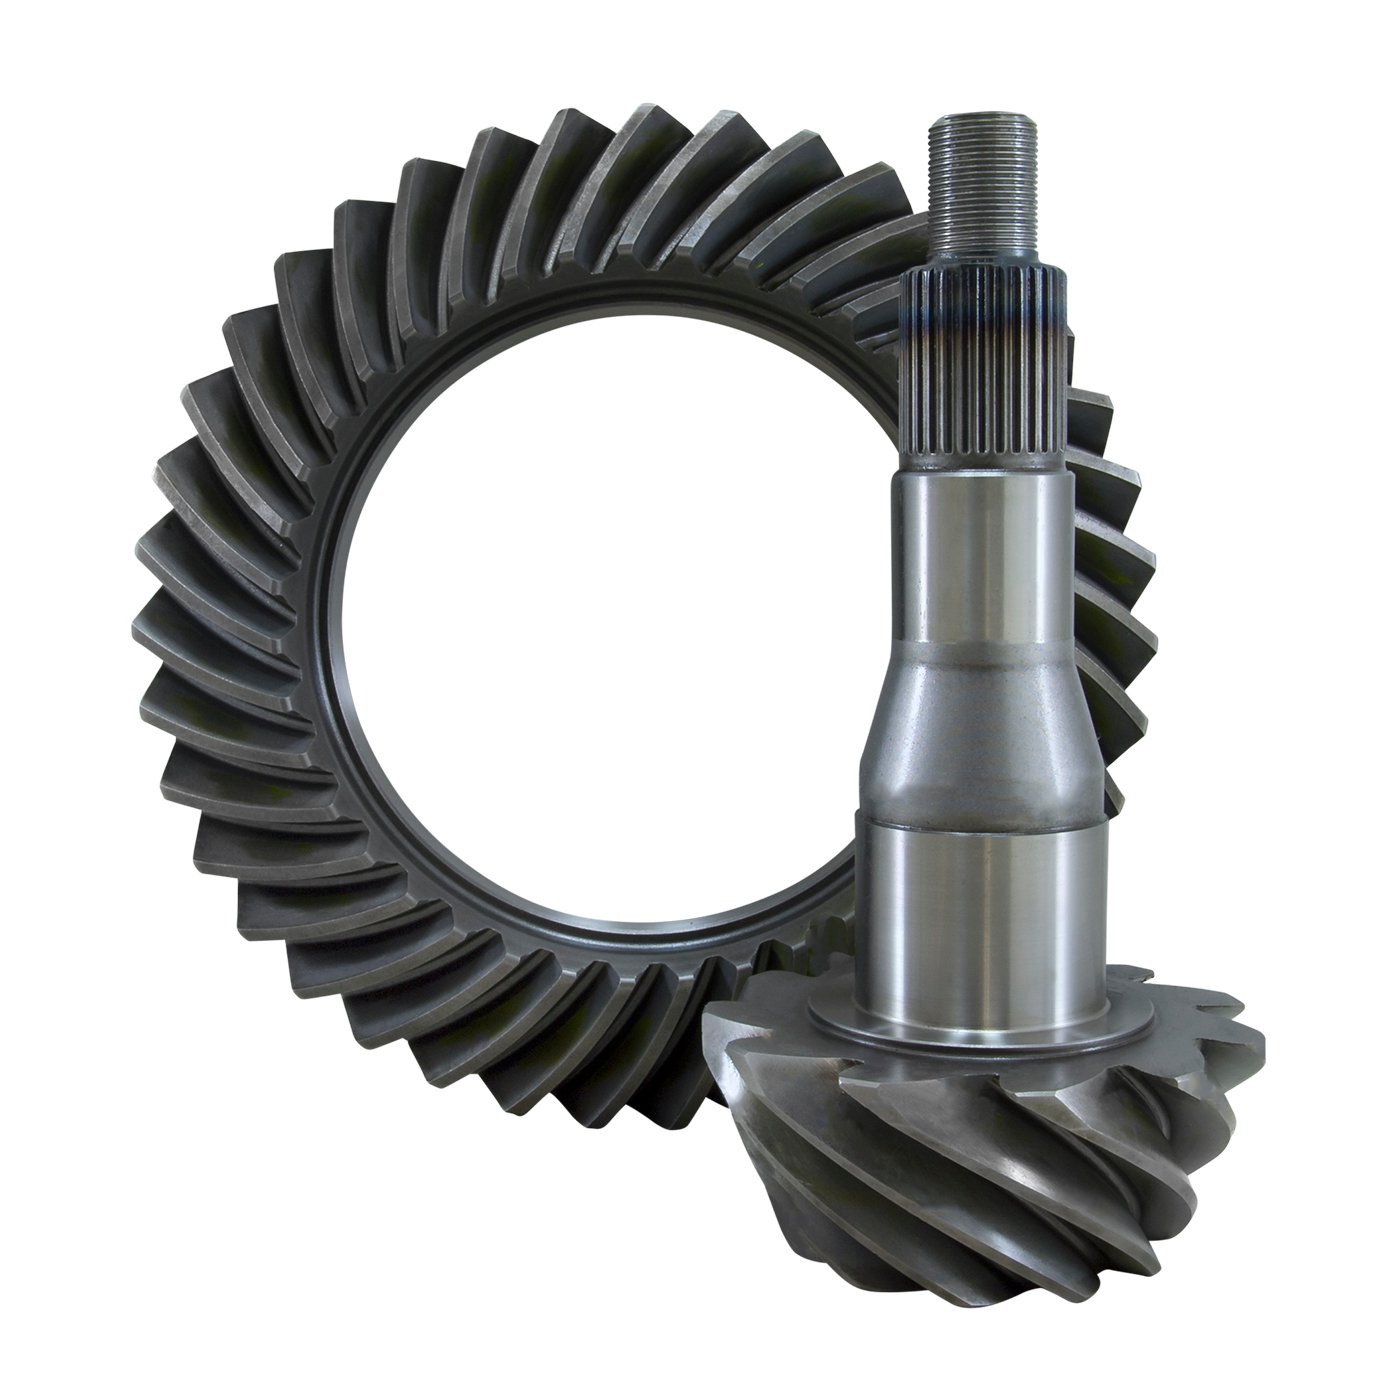 USA Standard 36297 Ring & Pinion Gear Set, For '11 & Up Ford 9.75 in., 4.88 Ratio